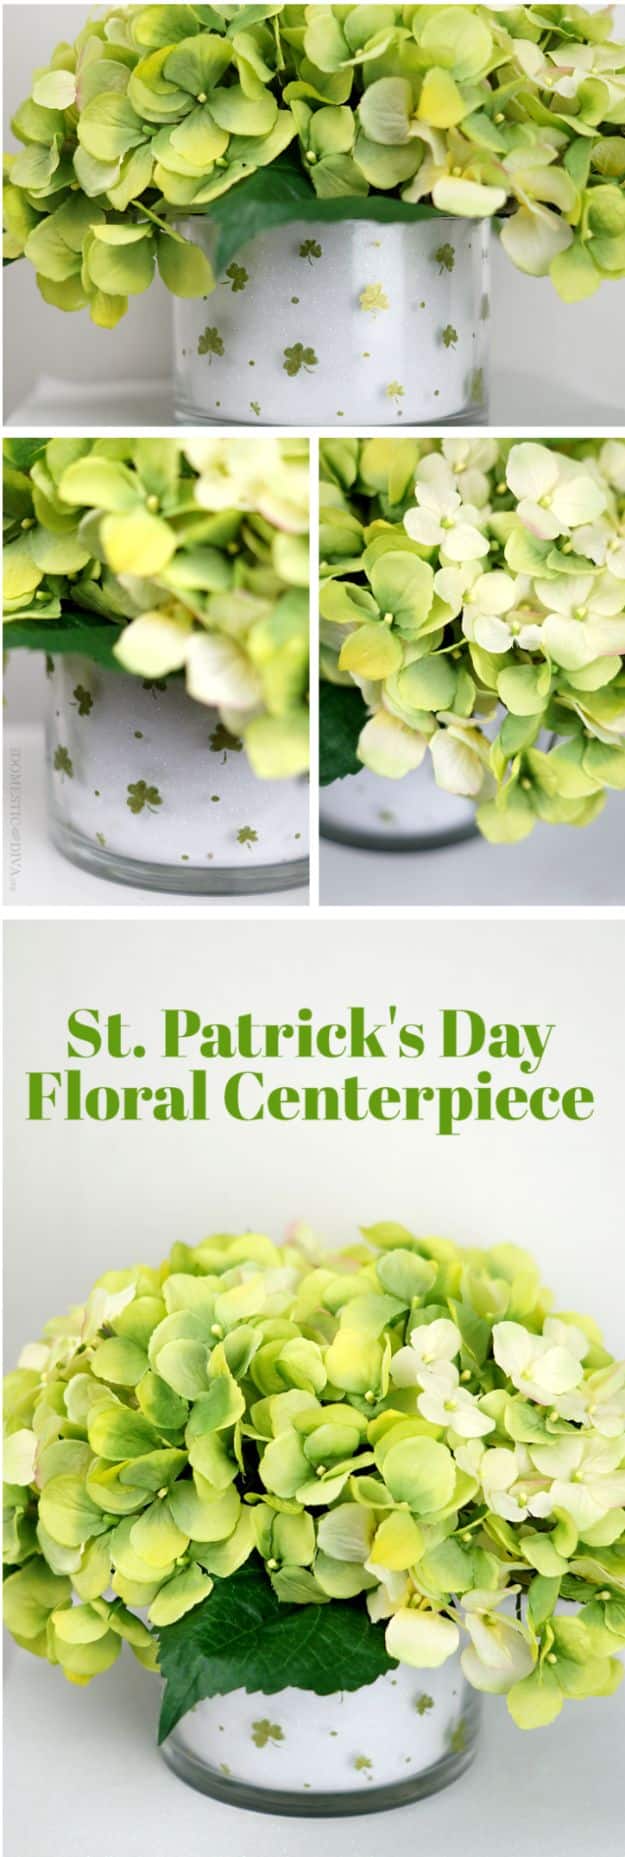 St Patricks Day Decor Ideas - DIY Shamrock Floral Arrangement Centerpiece - DIY St. Patrick's Day Party Decorations and Home Decor Crafts - Projects for Walls, Hanging Banners, Wreaths, Tabletop Centerpieces and Party Favors - Green Shamrocks, Leprechauns and Cute and Easy Do It Yourself Decor For Parties - Cheap Dollar Store Ideas for Those On A Budget http://diyjoy.com/diy-st-patricks-day-decor